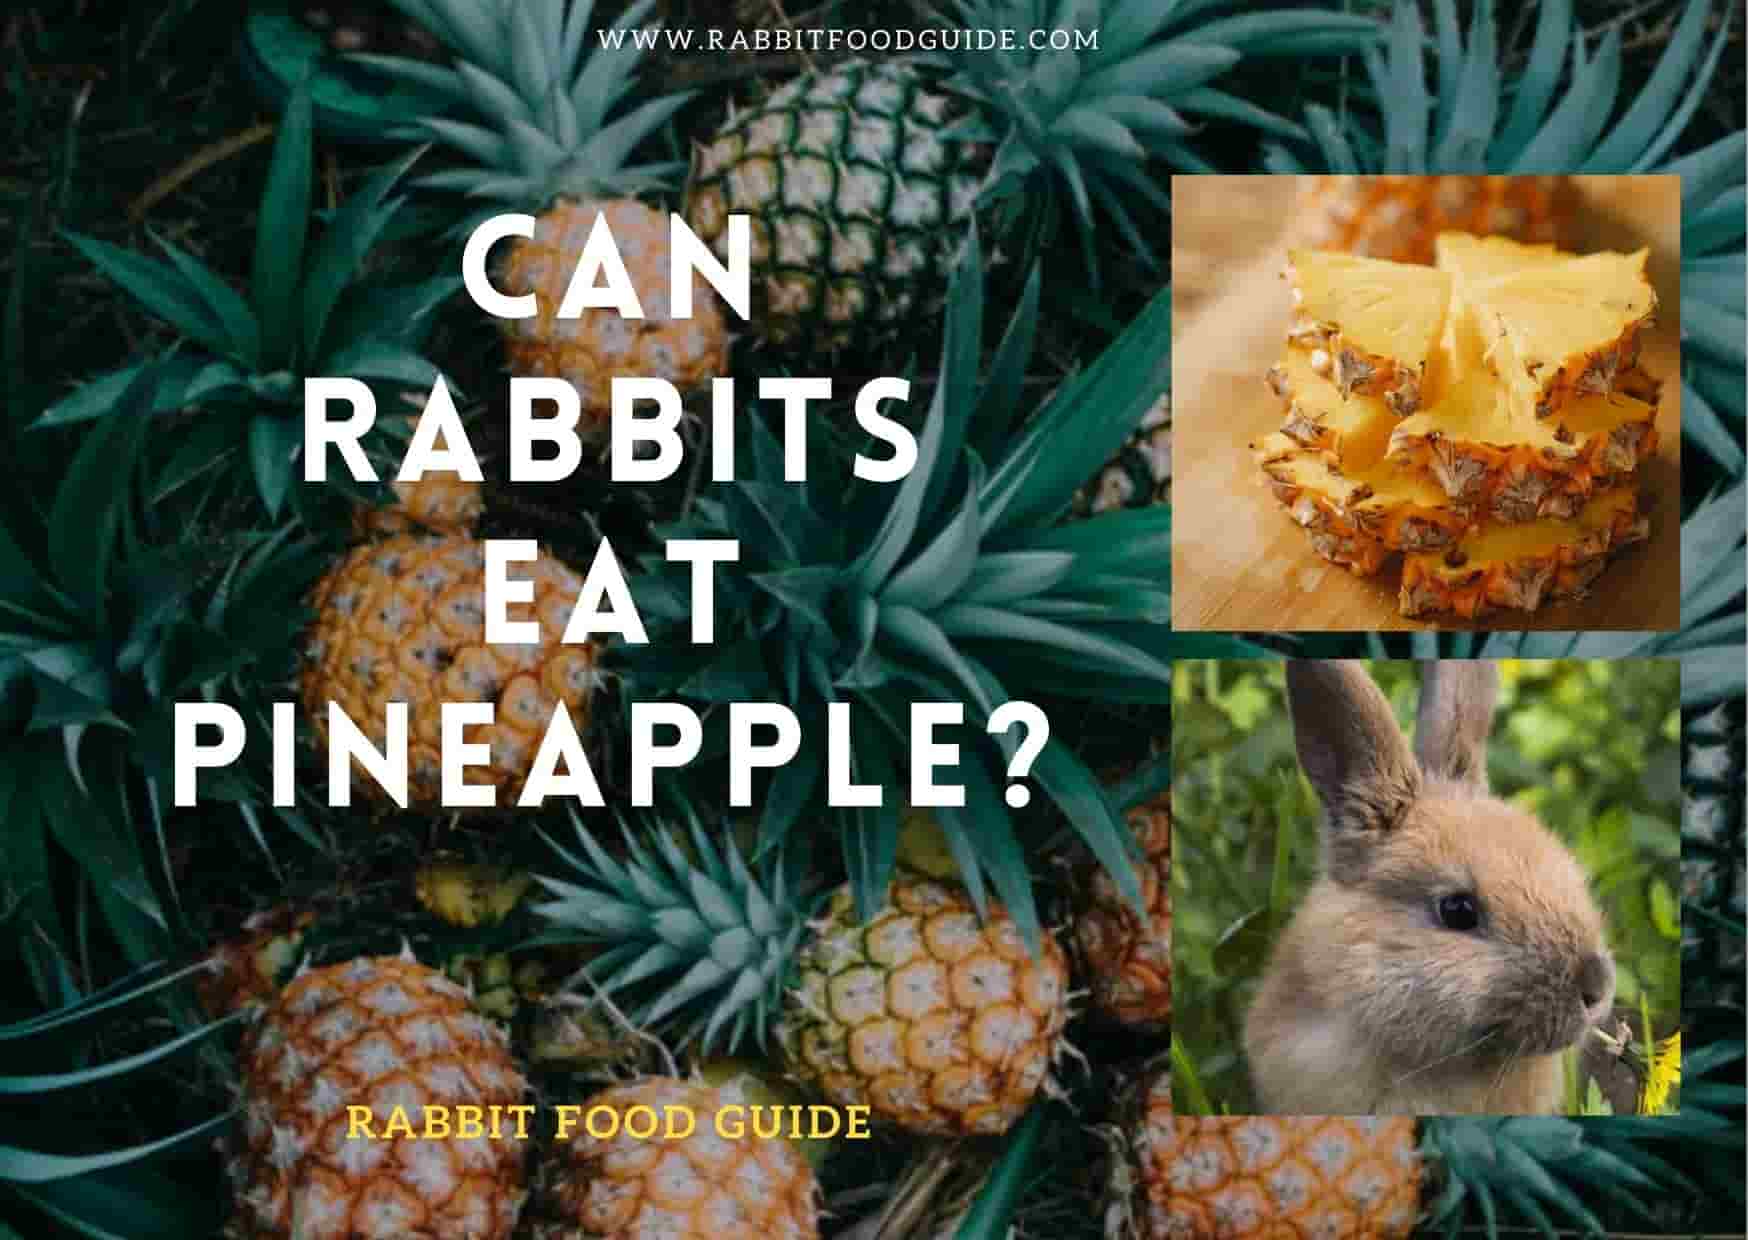 can rabbits eat pineapple?